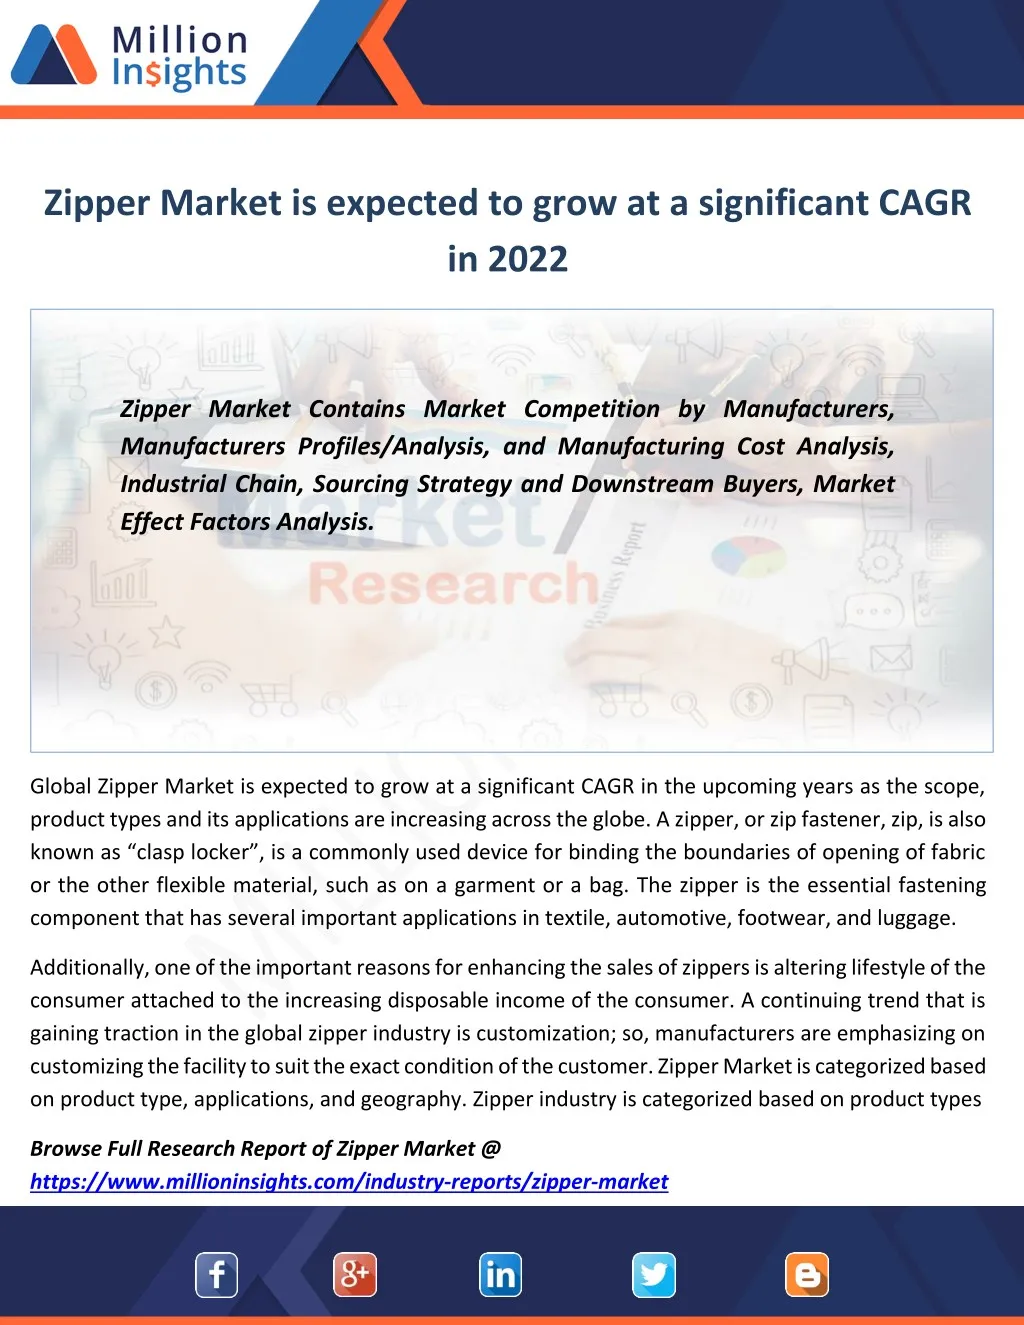 zipper market is expected to grow